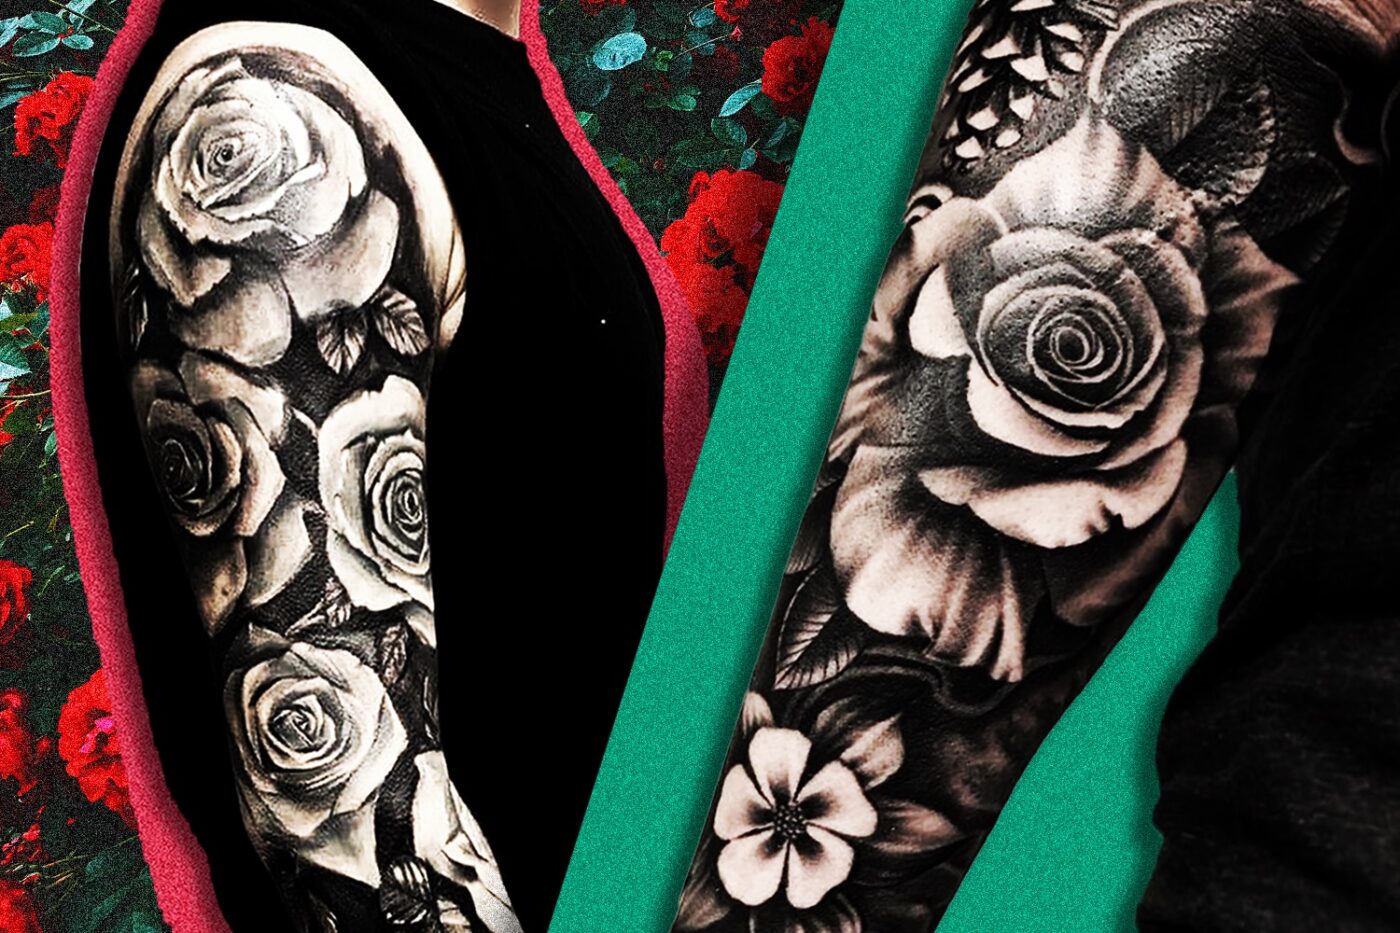 15 Awesome Forearm Tattoo Designs And Ideas  Styles At Life